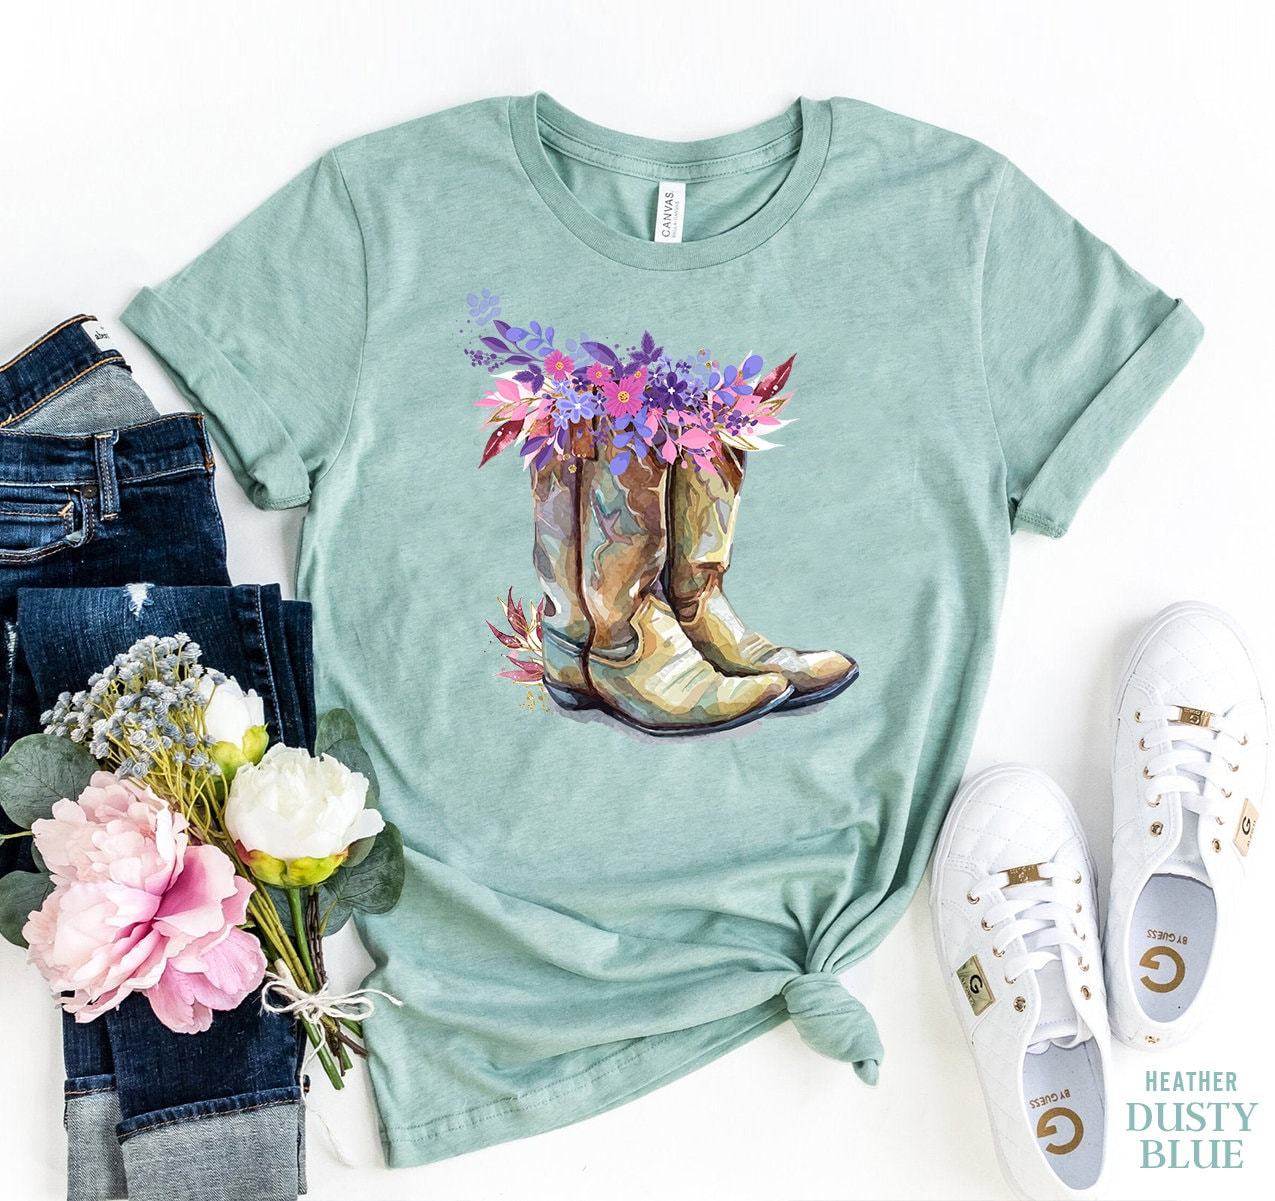 Cowgirl Boots T-Shirt, Western Tshirt, Country Girl Tee, Cowgirl Boot Gift, Rodeo Shirt, Farm Tshirt, Cowgirl Tshirt, Texas Girl Rodeo Gift